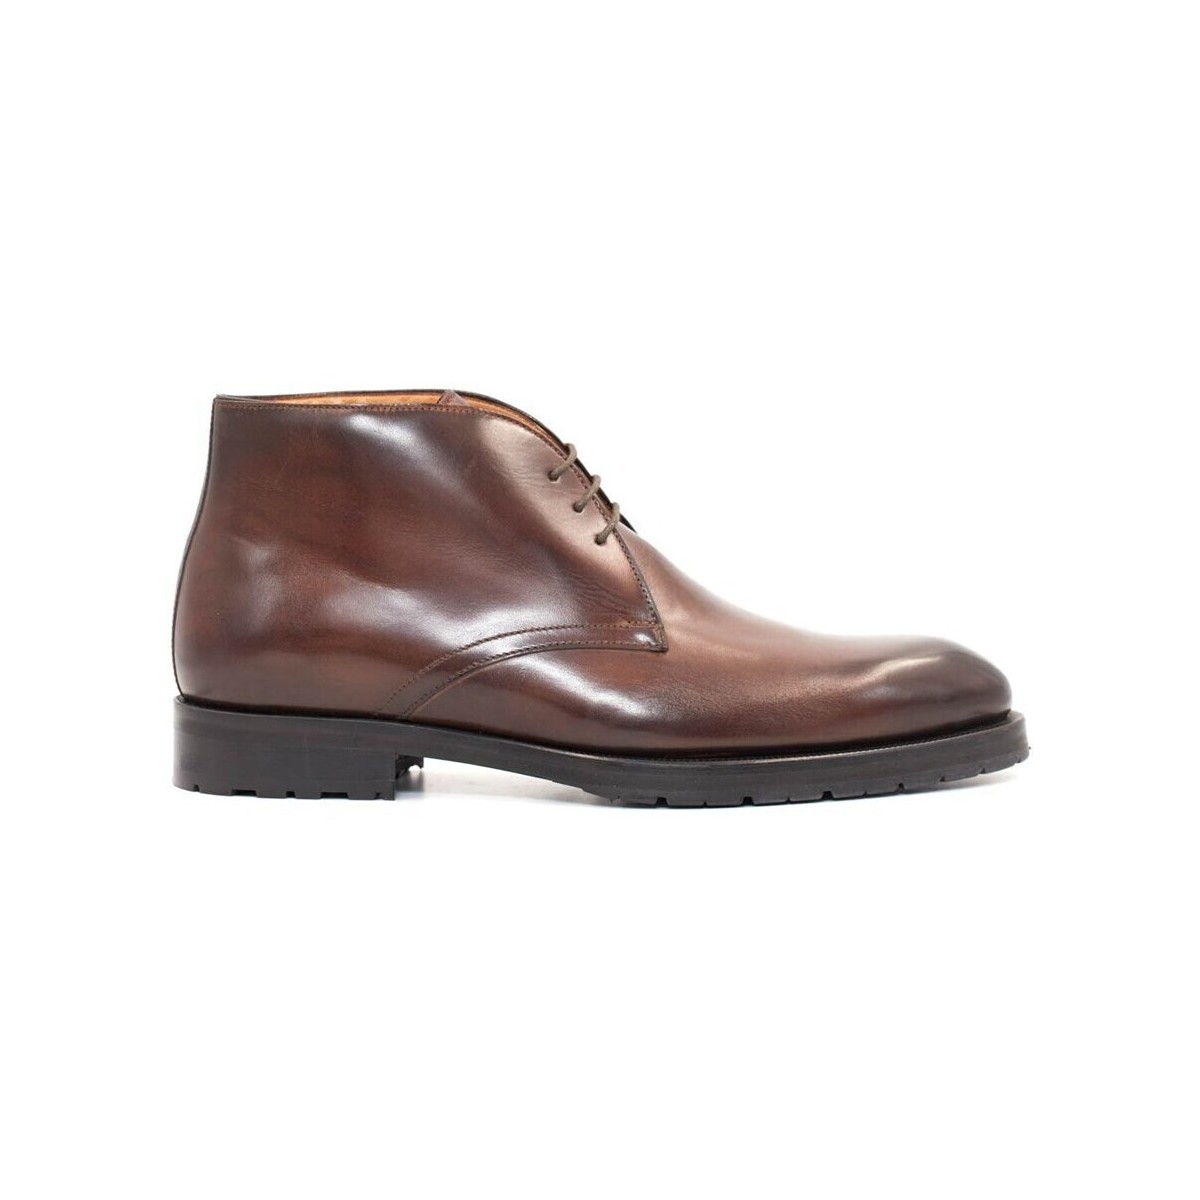 Finsbury Shoes Marron TOMASO pUVdweSp